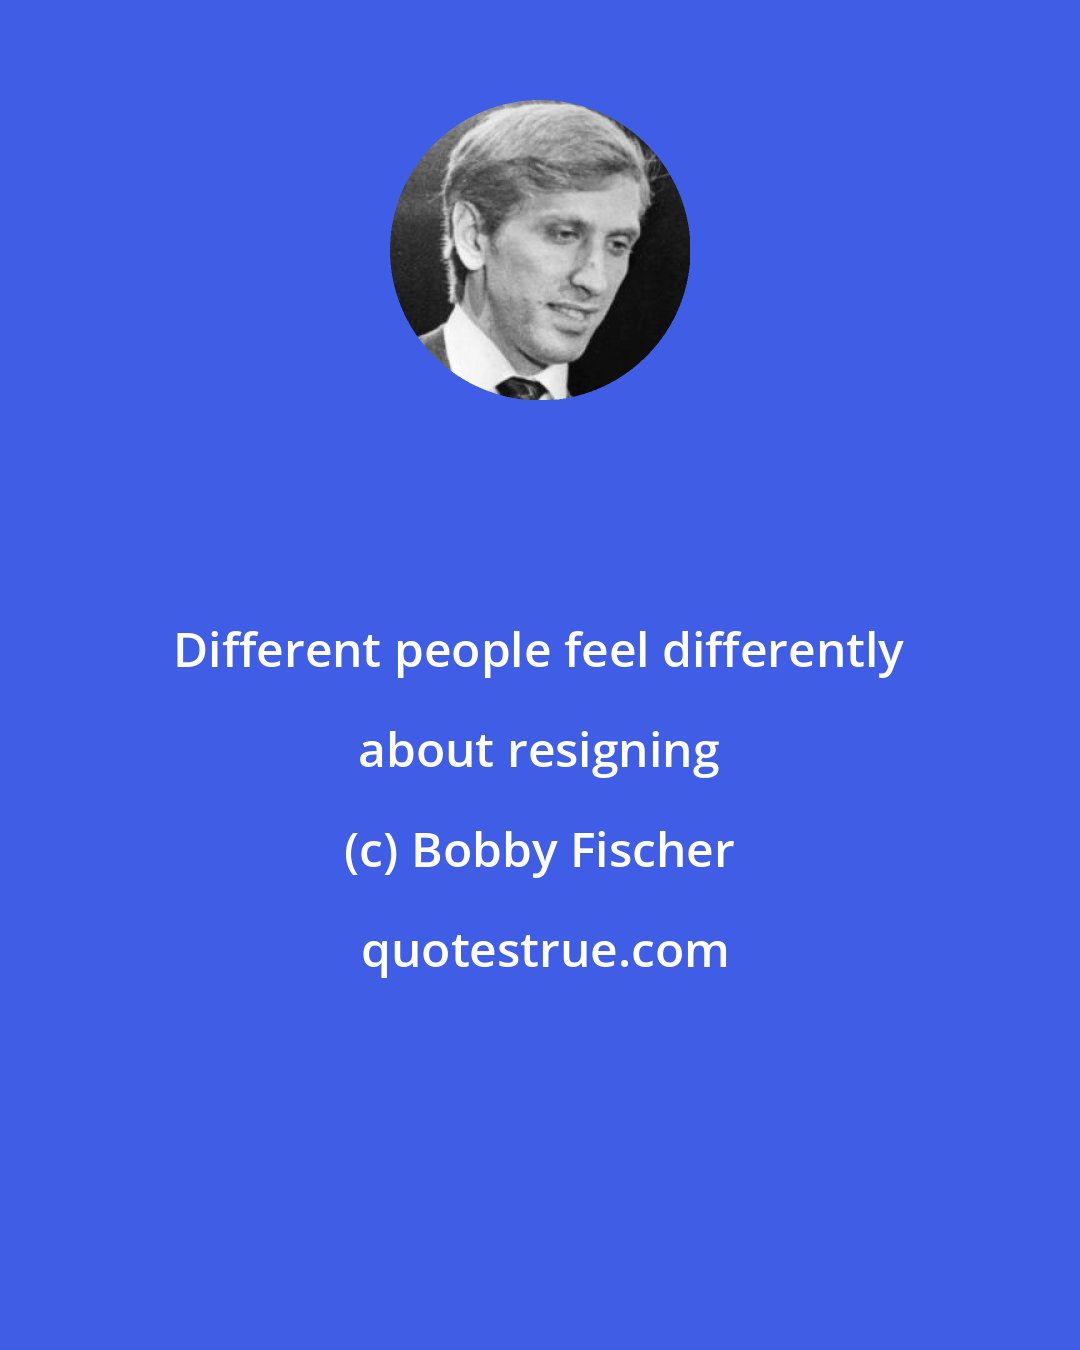 Bobby Fischer: Different people feel differently about resigning